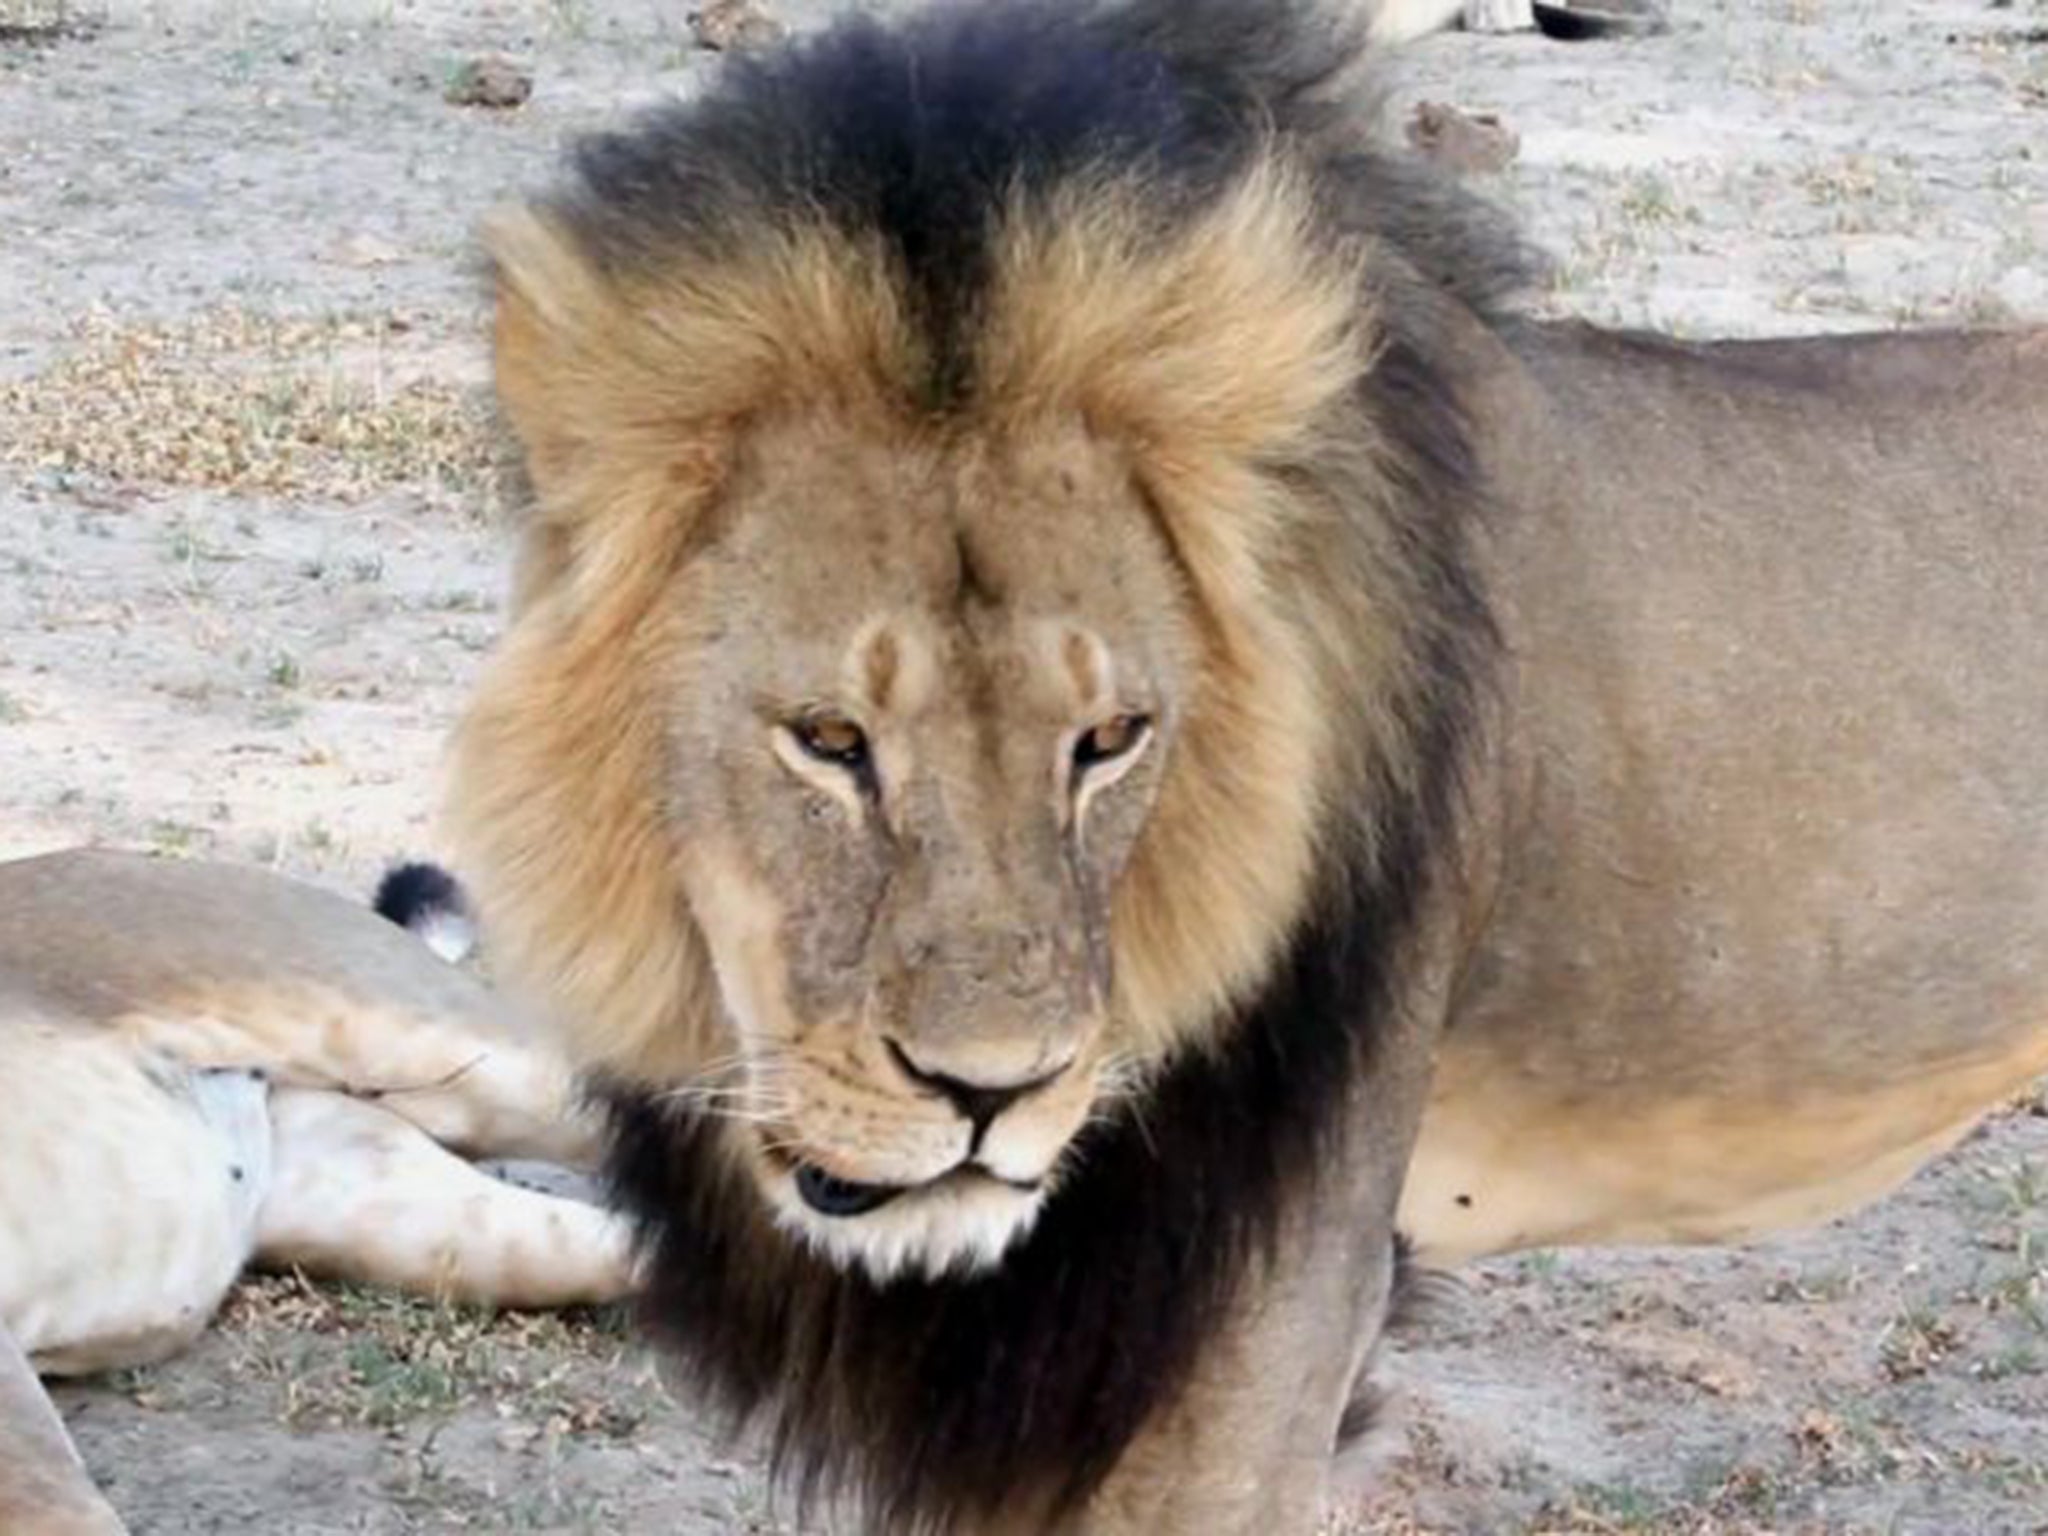 Cecil the Lion, before he was killed by American hunter Walter Palmer